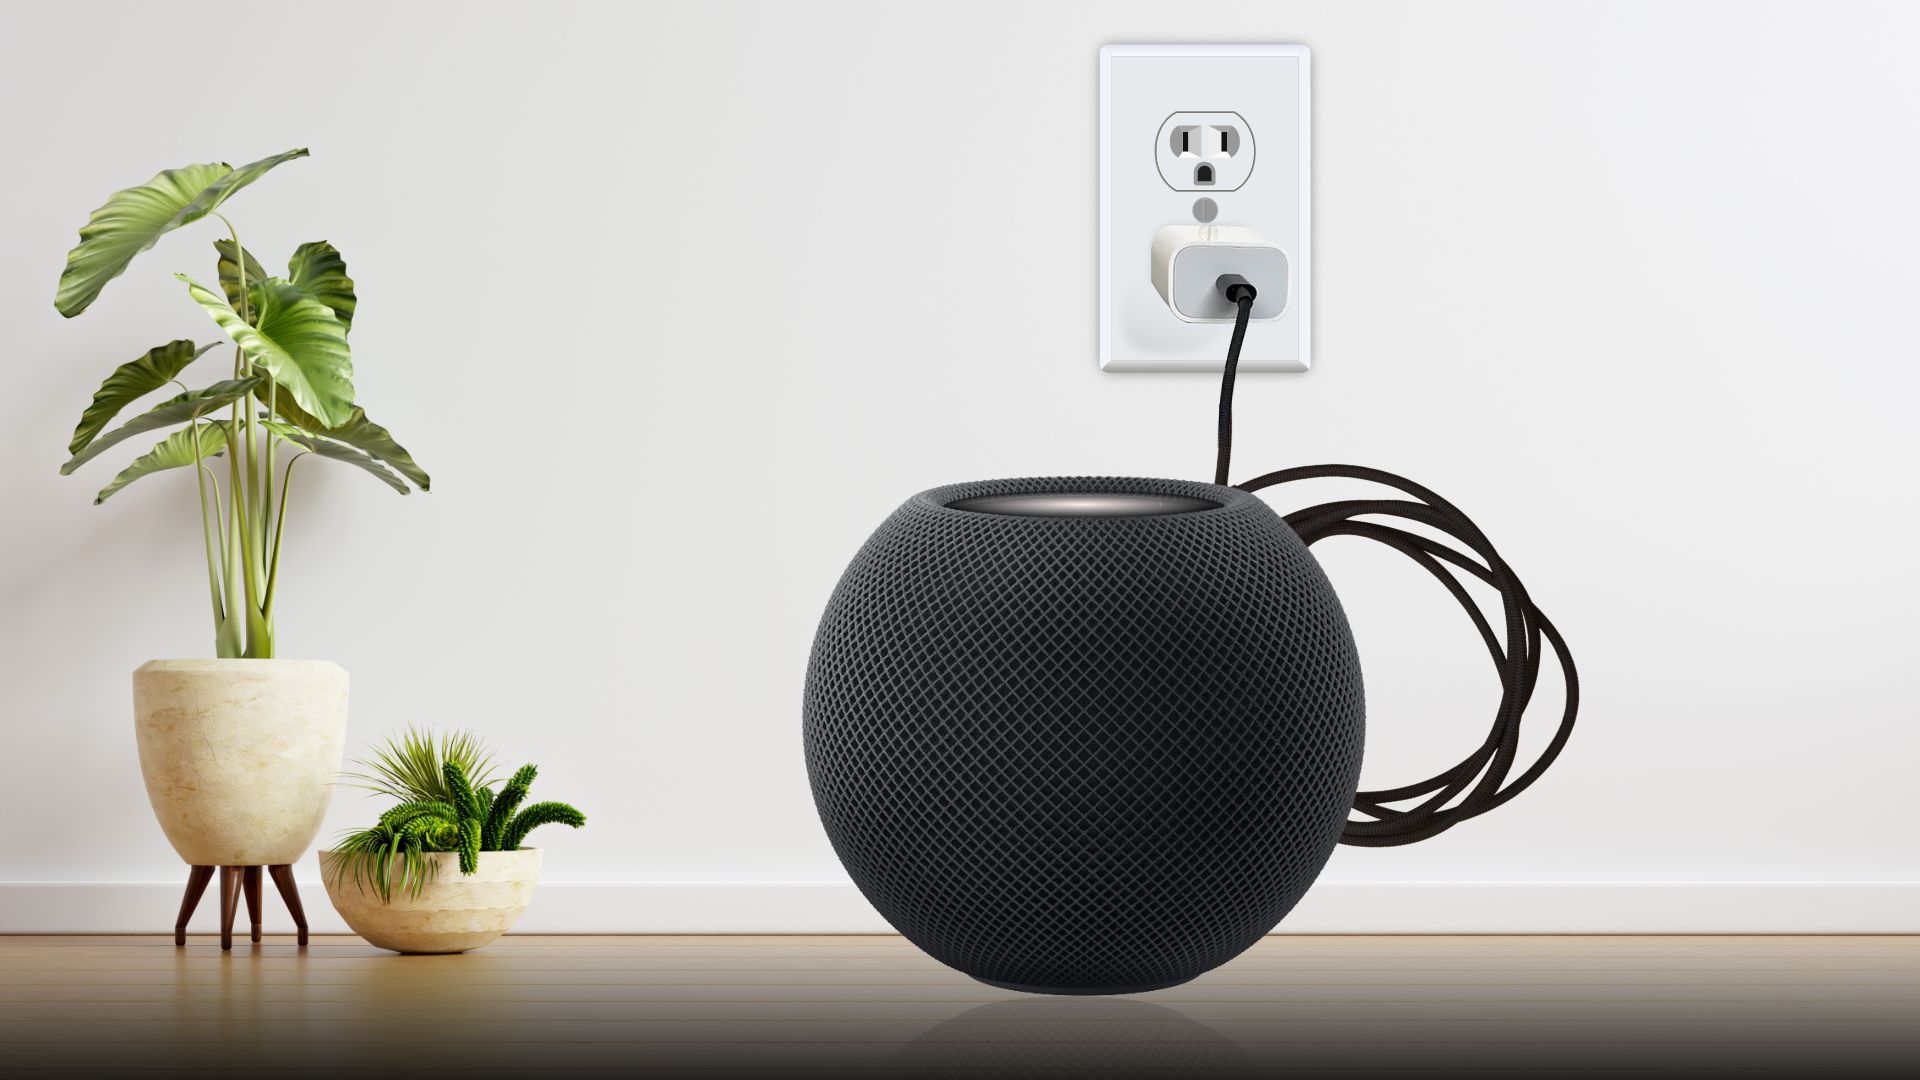 steps on connecting HomePod mini to a power source